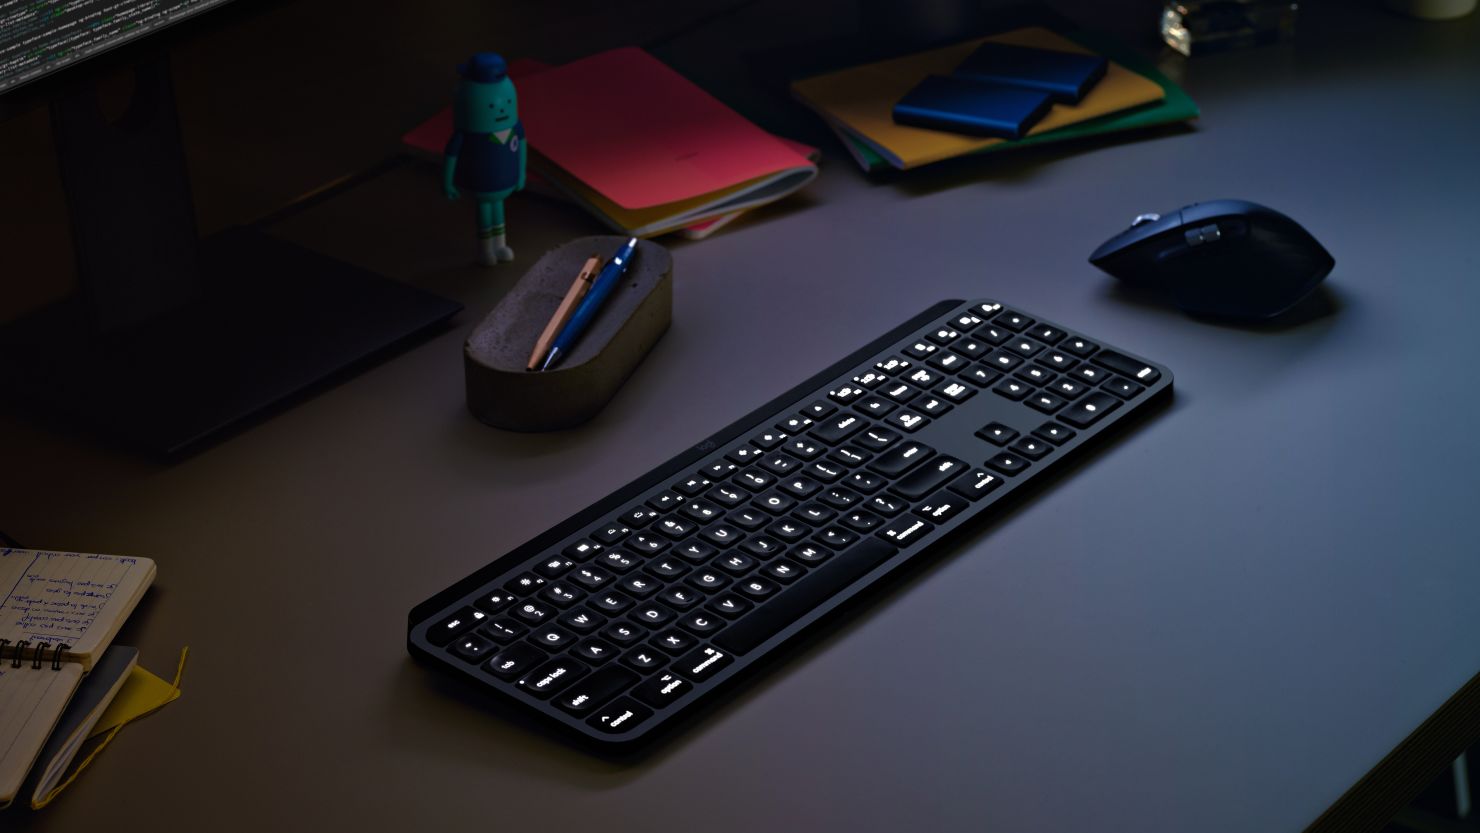 Logitech has updated the MX Keys, MX Master 3 and K380 keyboard  specifically for the Mac